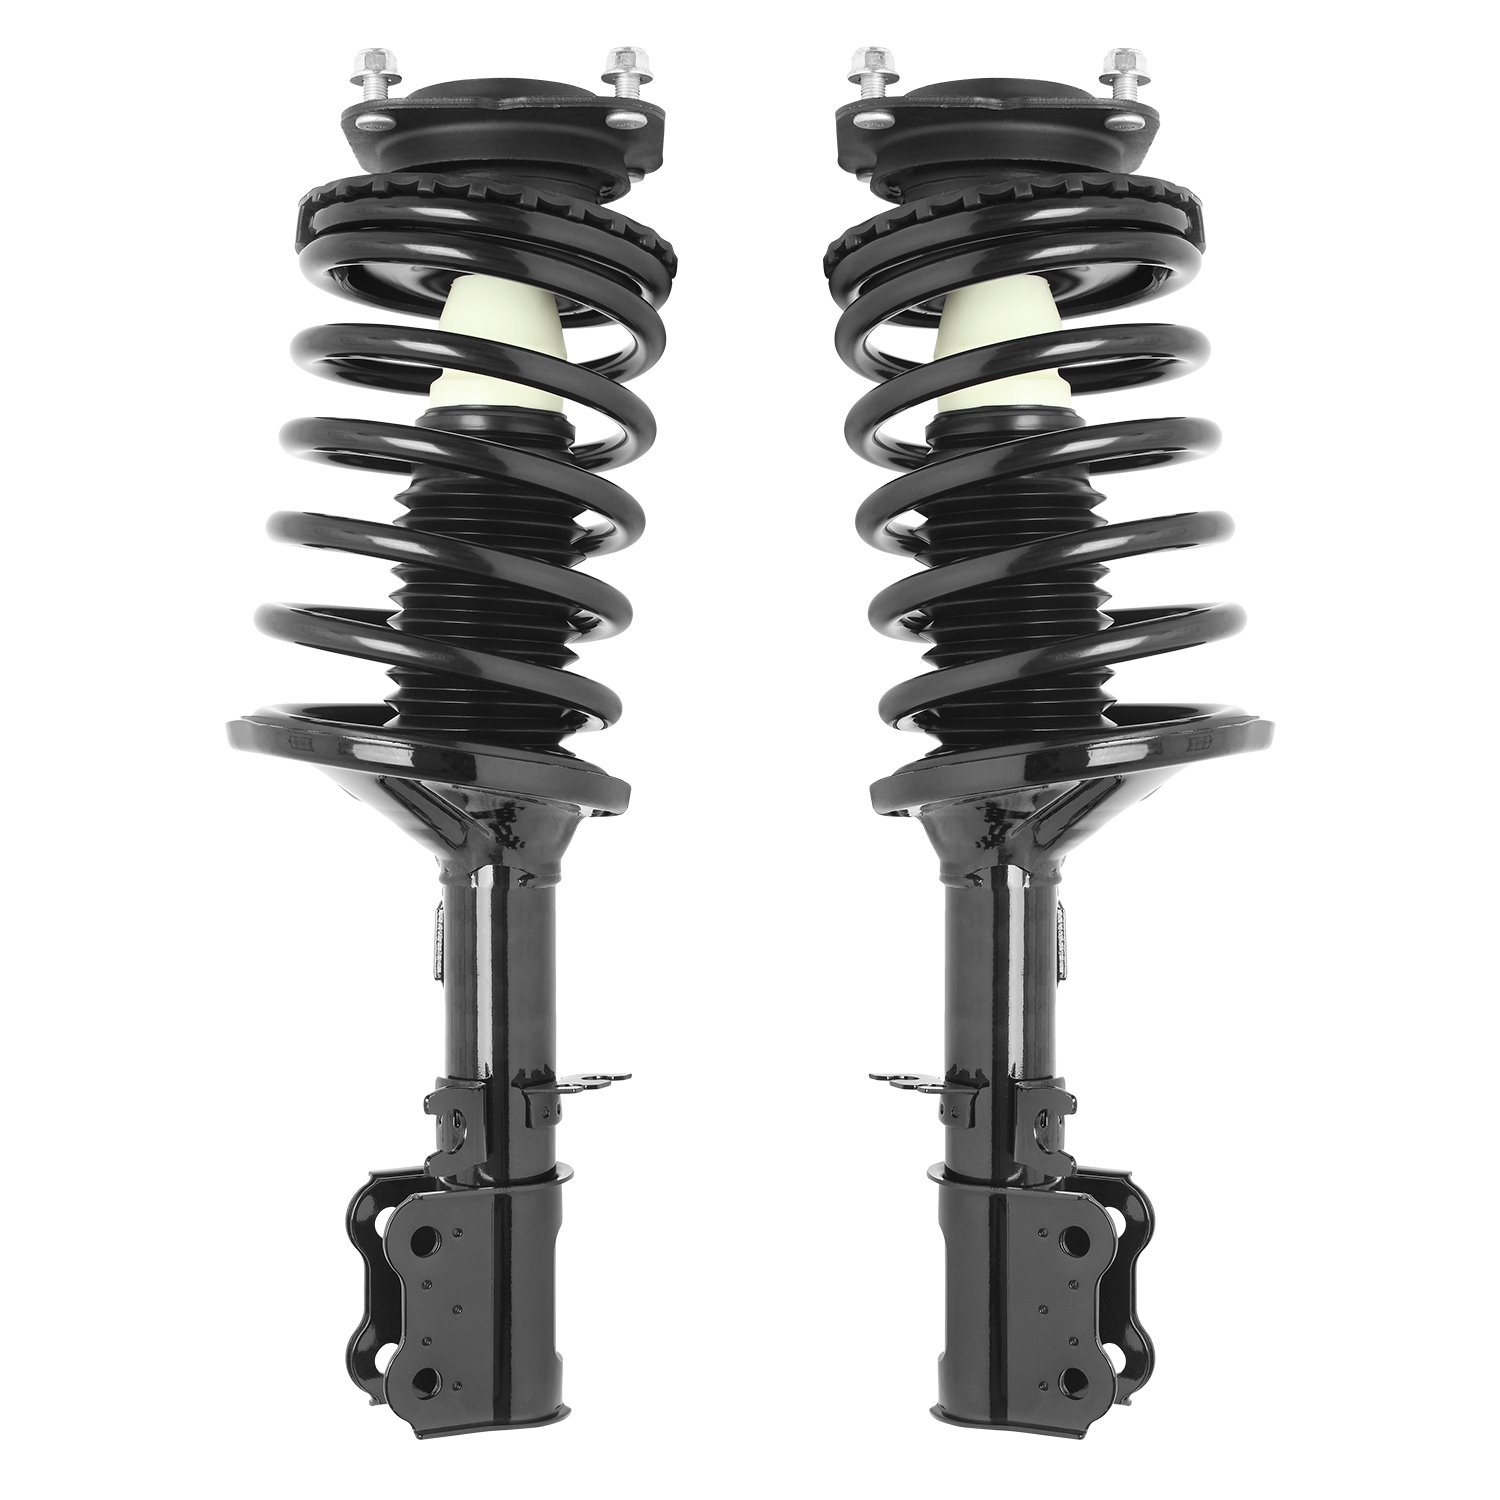 2-11833-11834-001 Suspension Strut & Coil Spring Assembly Set Fits Select Kia Spectra